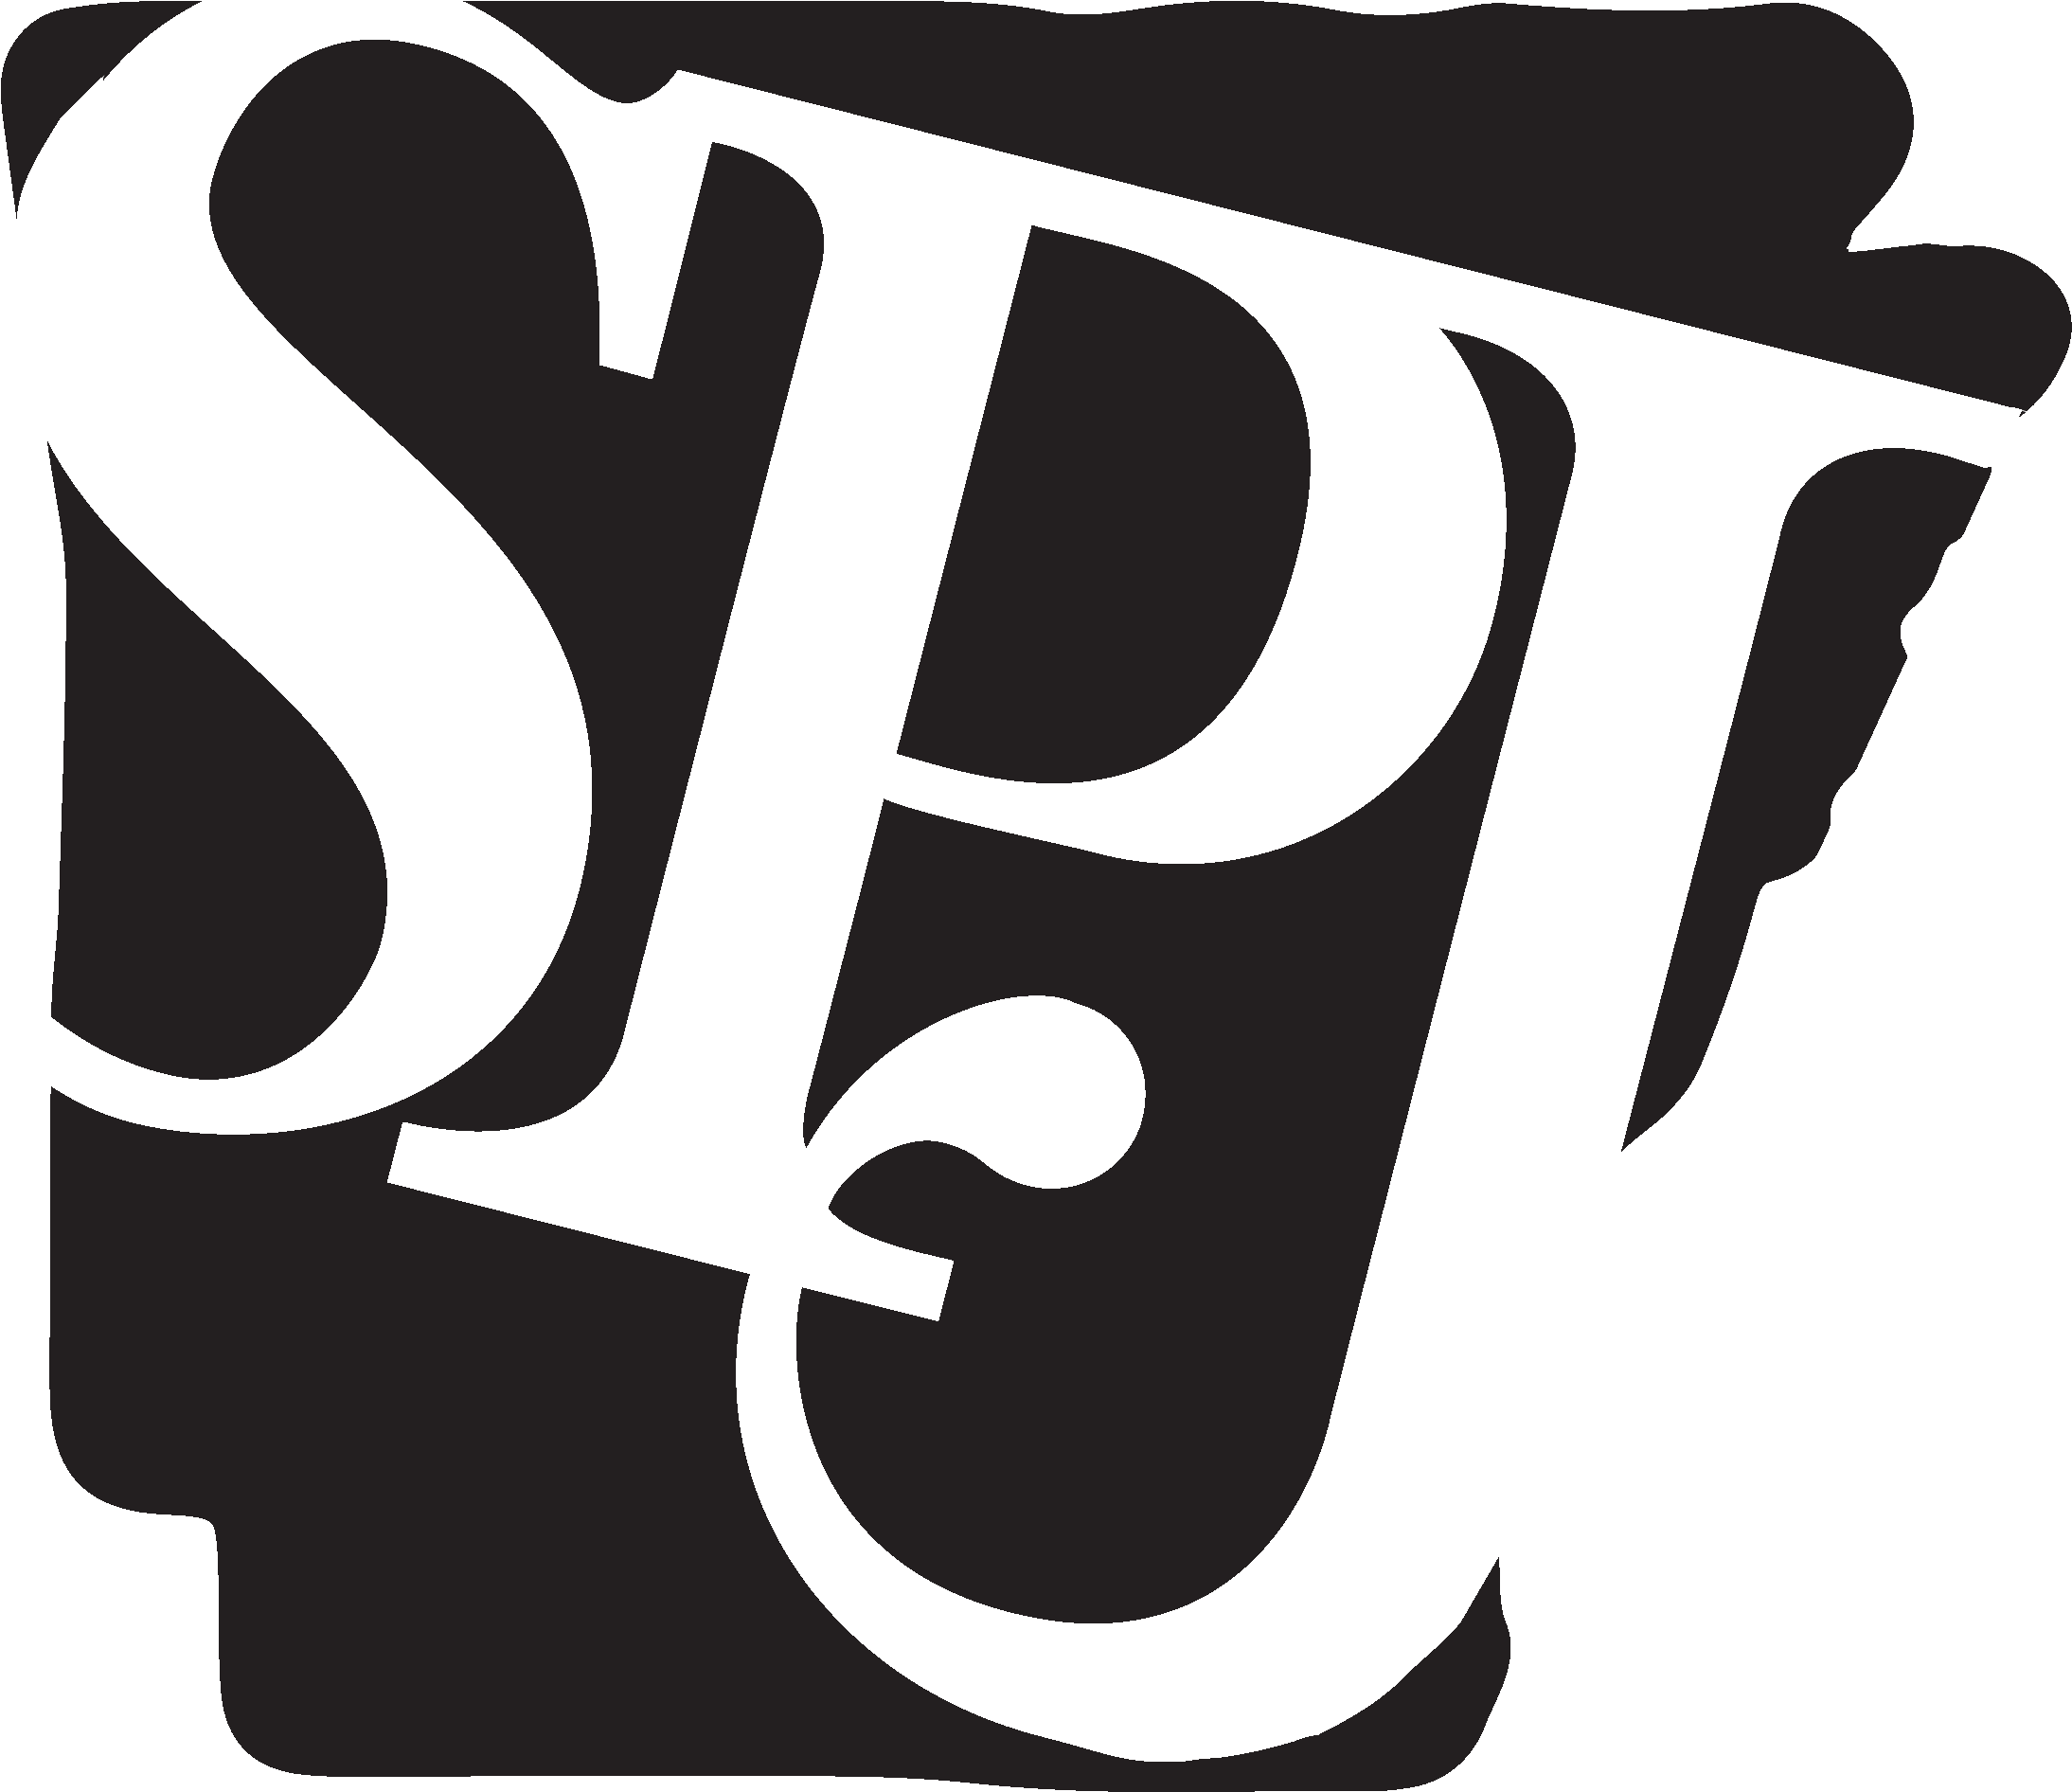 Society Of Professional Journalists - Society Of Professional Journalists (2207x2124)